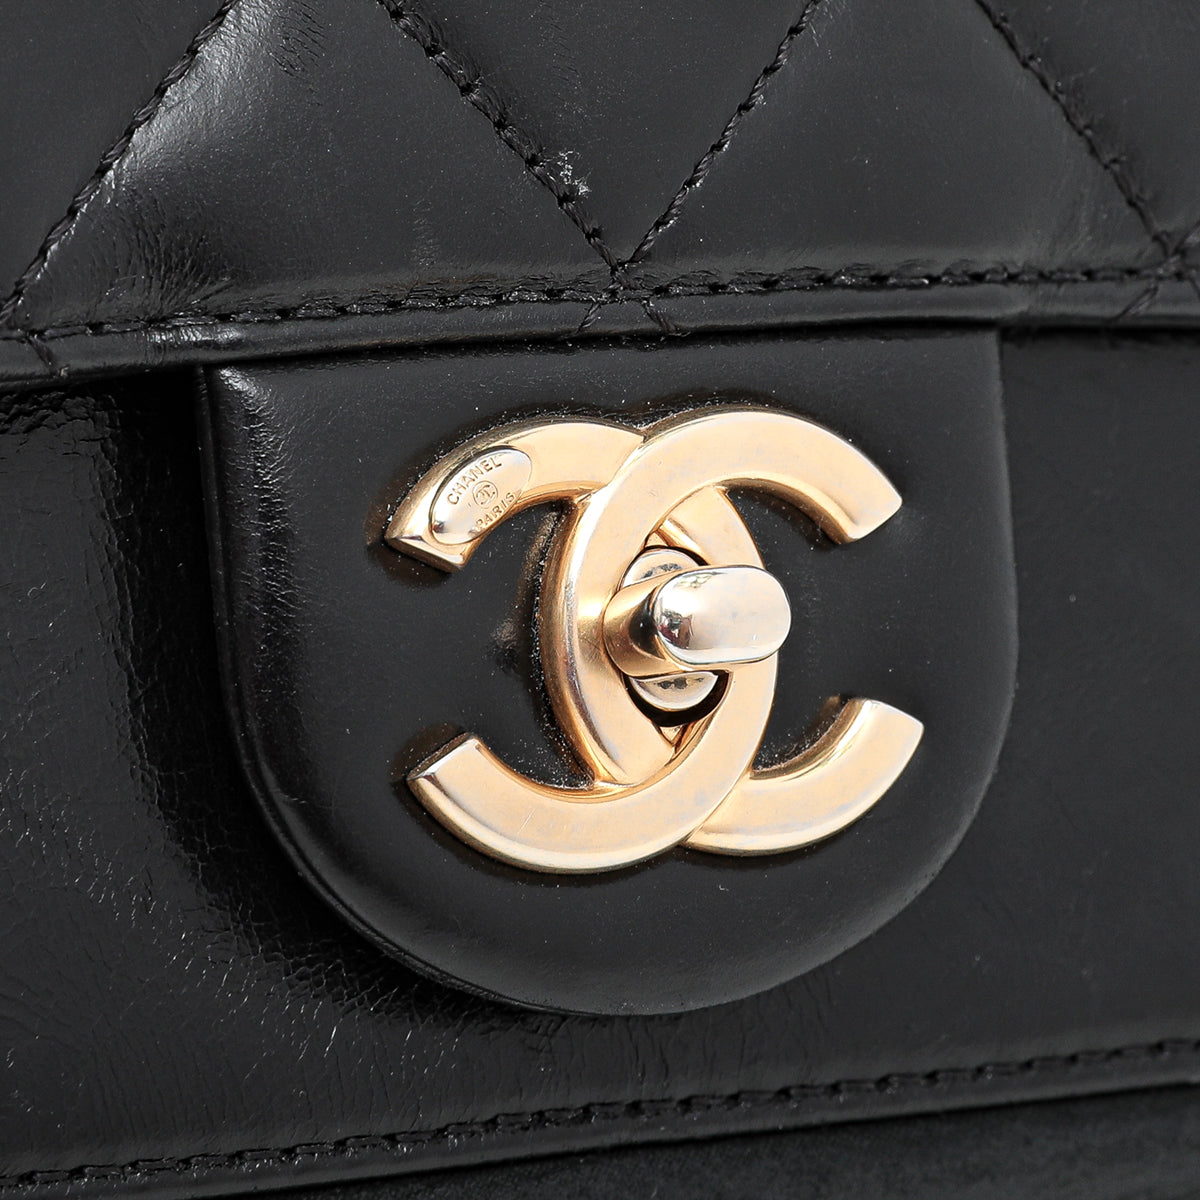 Chanel Pink Quilted Leather Mini Straight Lined Flap Bag Chanel  TLC